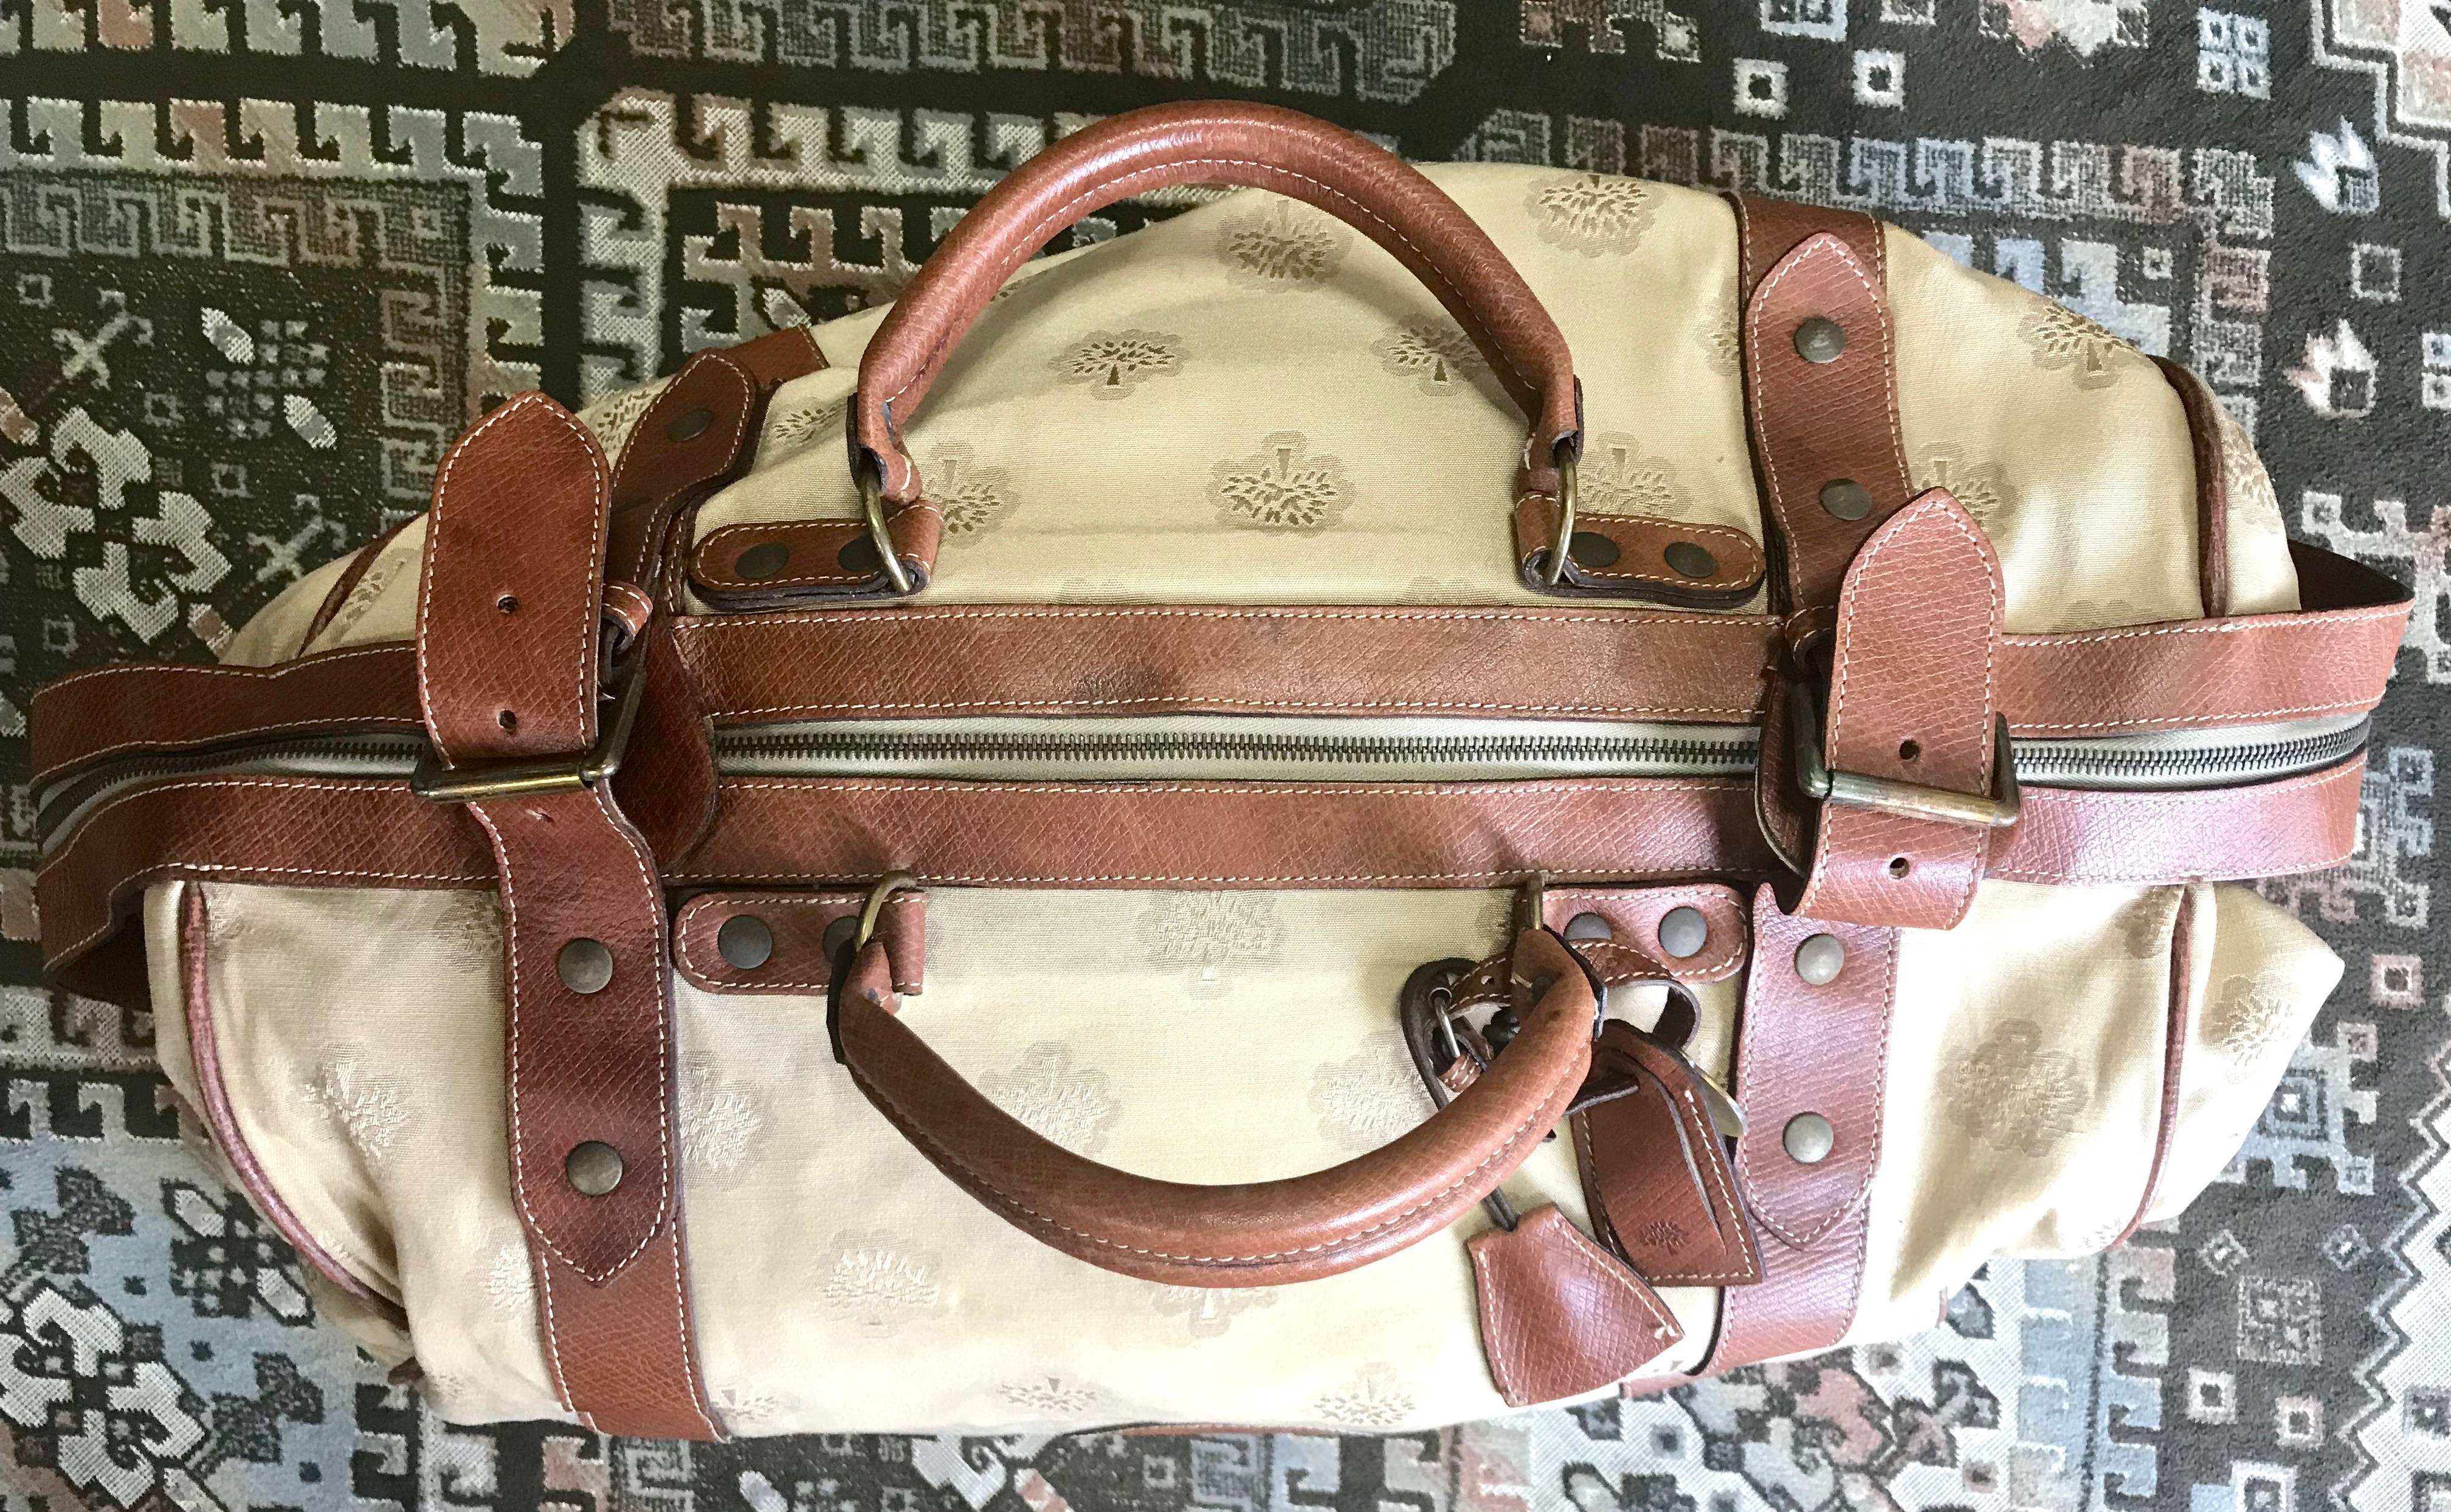 ***Due to its size, please note that it will be folded upon shipment***
1980s. Vintage Mulberry beige logo jacquard fabric travel bag, duffle bag with brown leather trimmings. Unisex use.

This is a sophisticated and classic vintage piece, beige